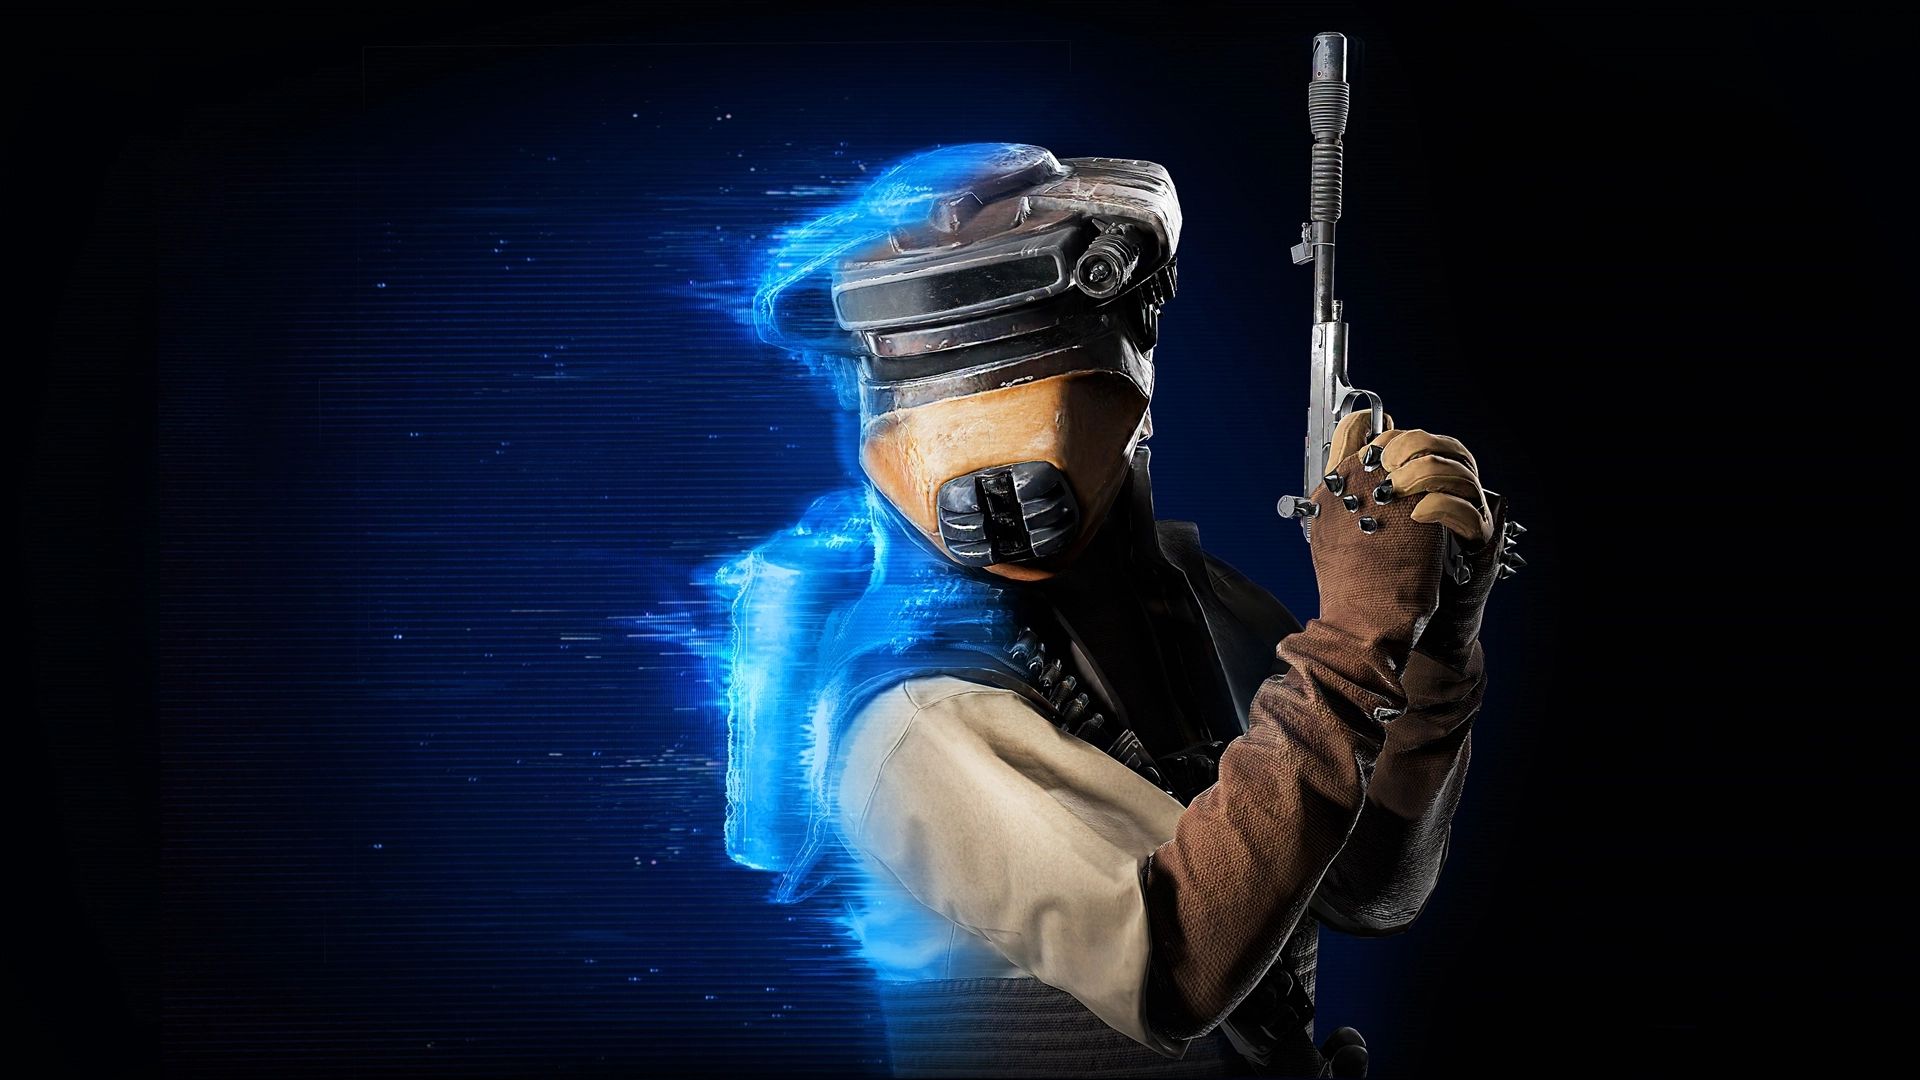 Image for Han Solo season kicks off next week in Star Wars Battlefront 2 with Hero Showdown, new appearances, more